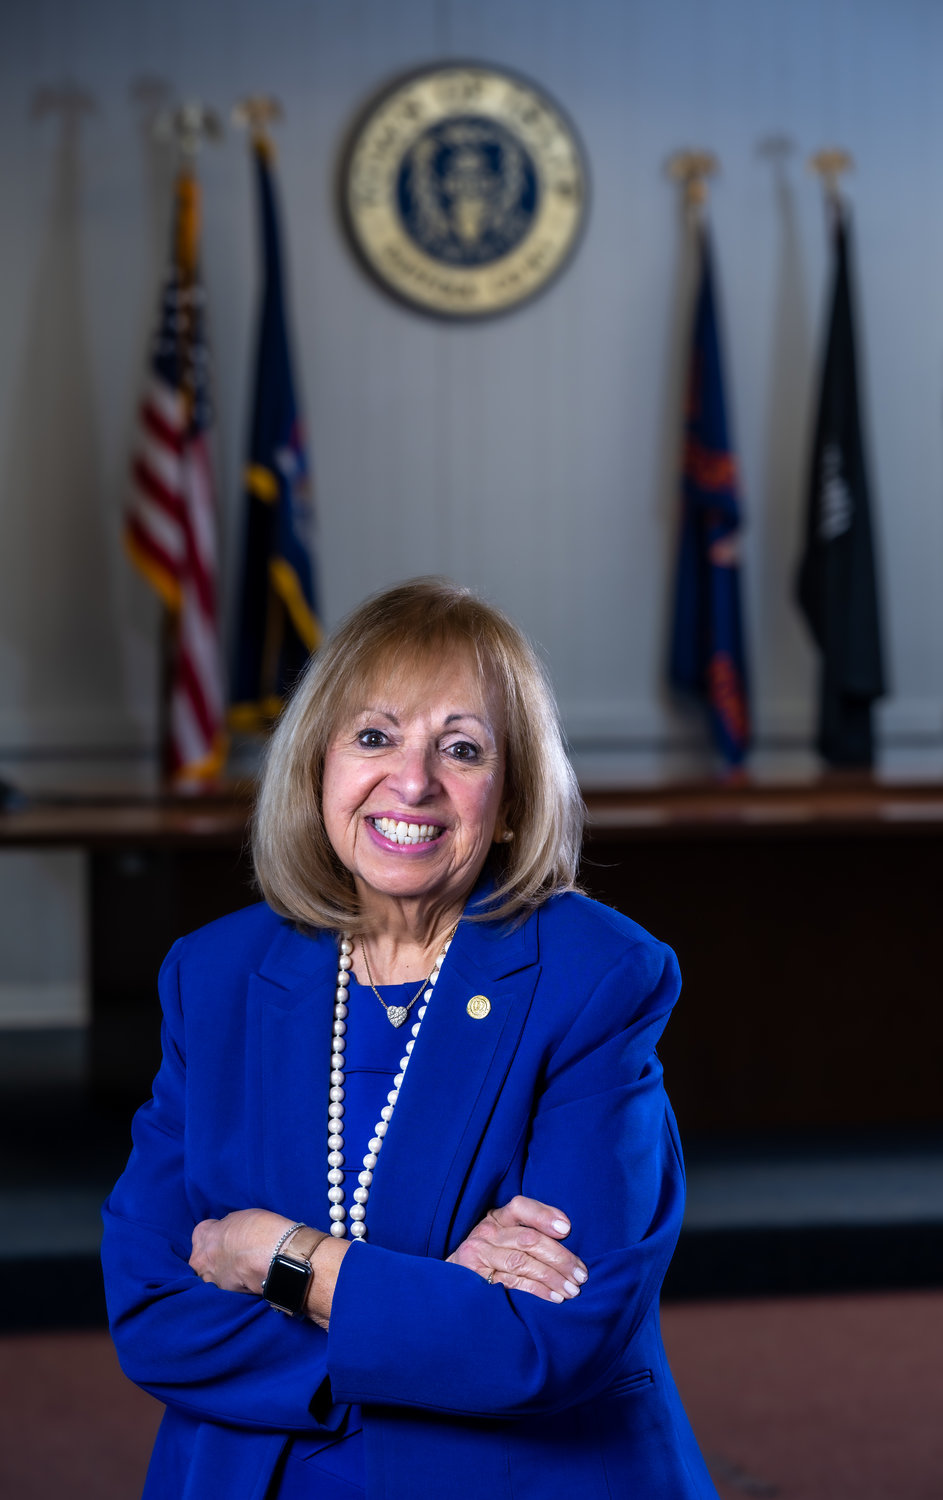 With experience as a county legislator, county treasurer, and town supervisor, Angie Carpenter has set a high bar for women in office, all while being a champion for parents and youth.